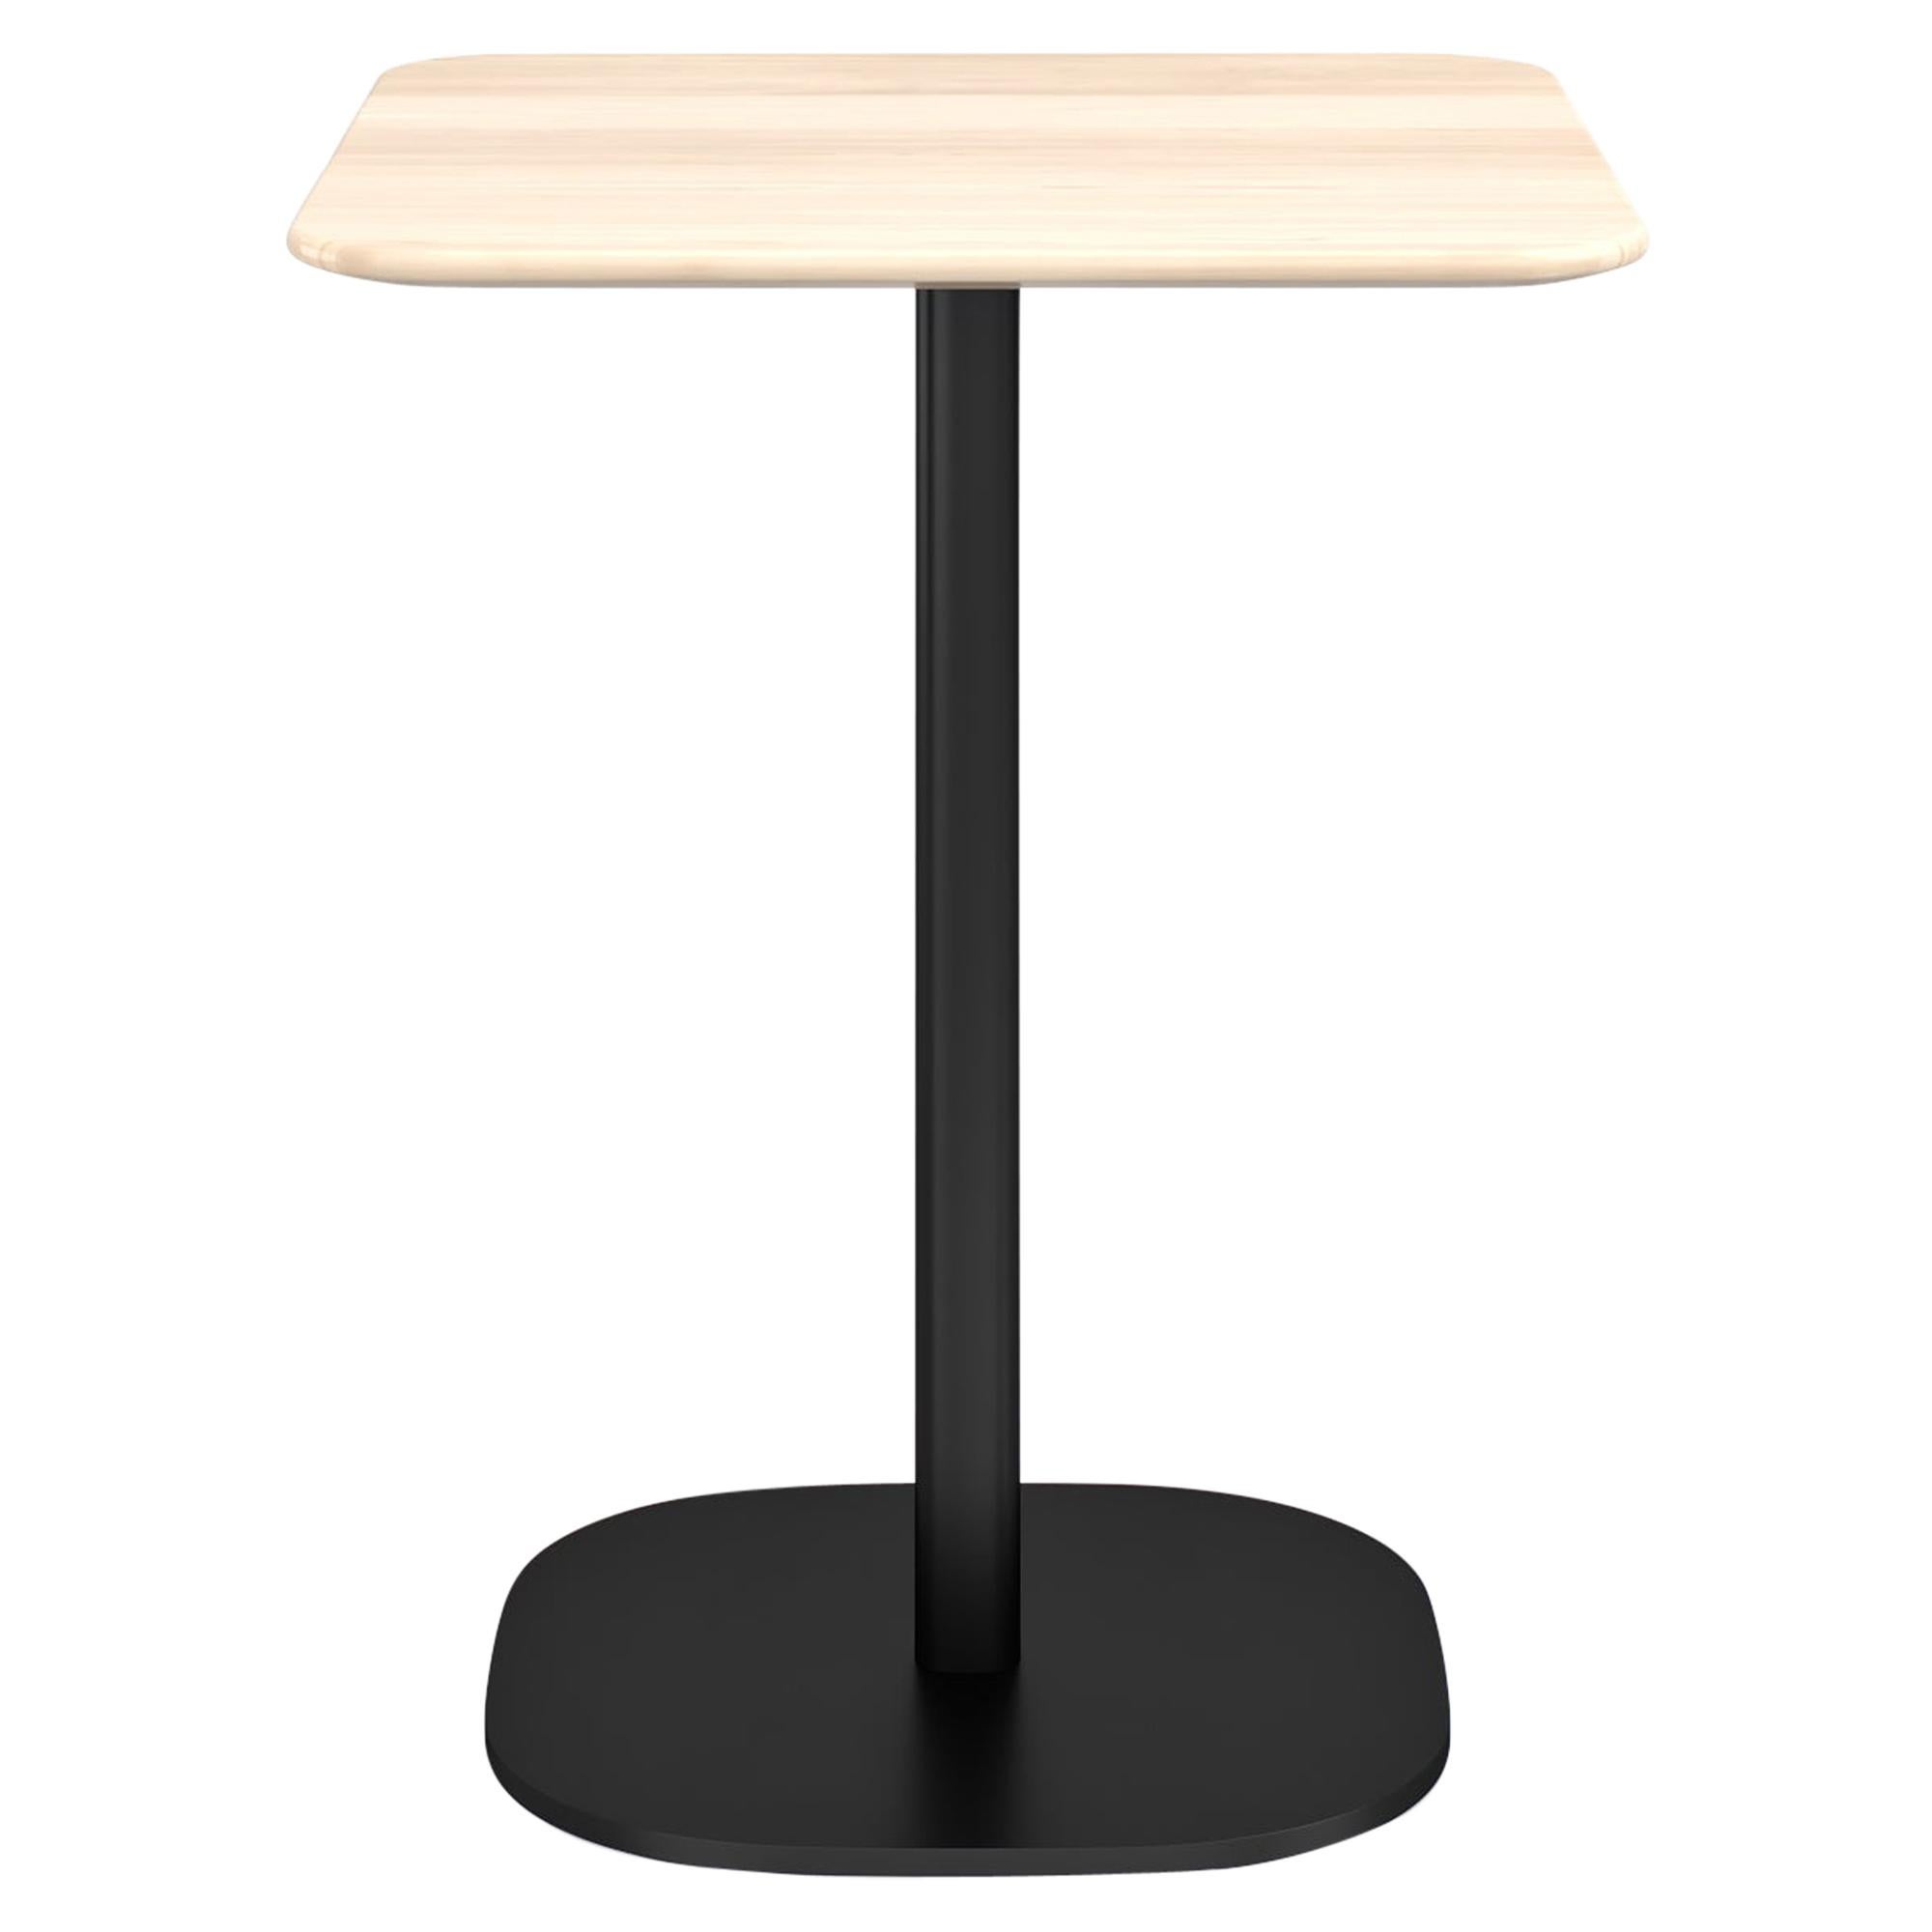 Emeco 2 Inch Small Cafe Table with Black Legs & Wood Top by Jasper Morrison